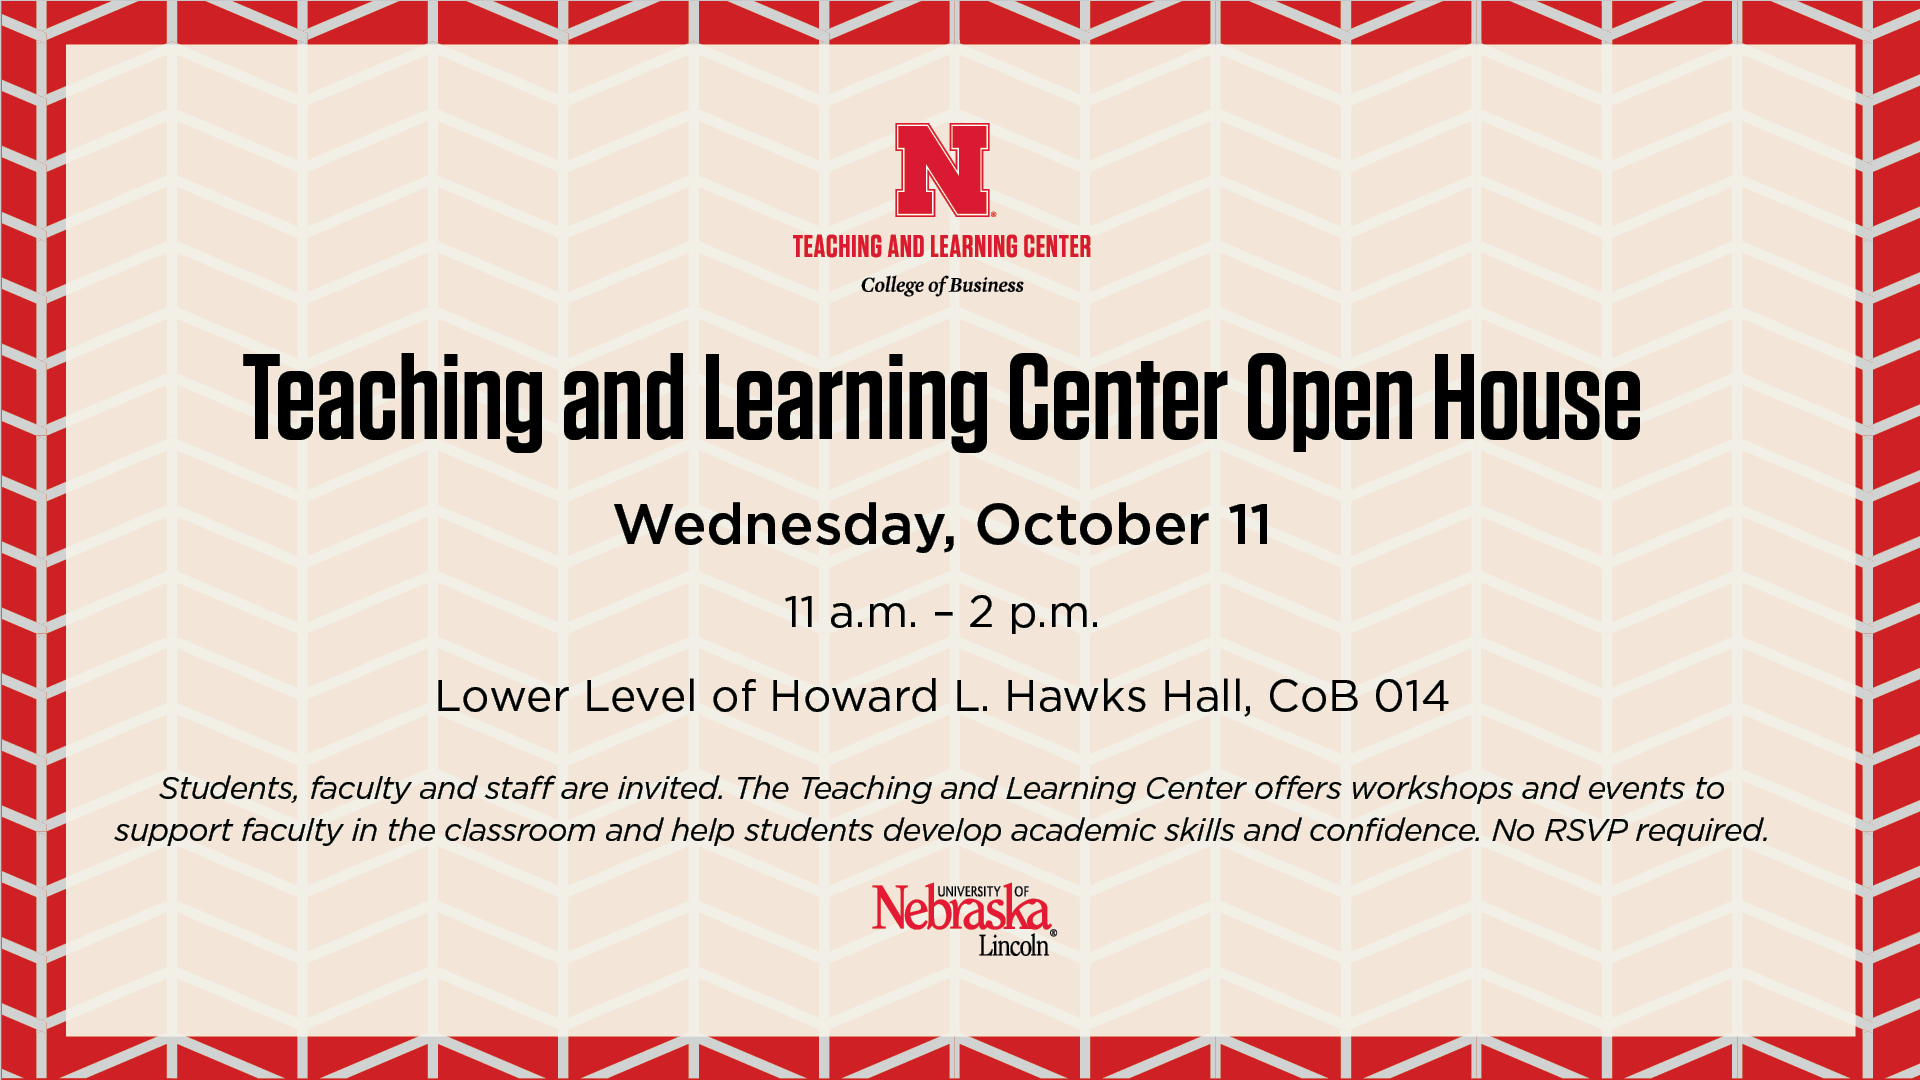 Teaching and Learning Center Open House